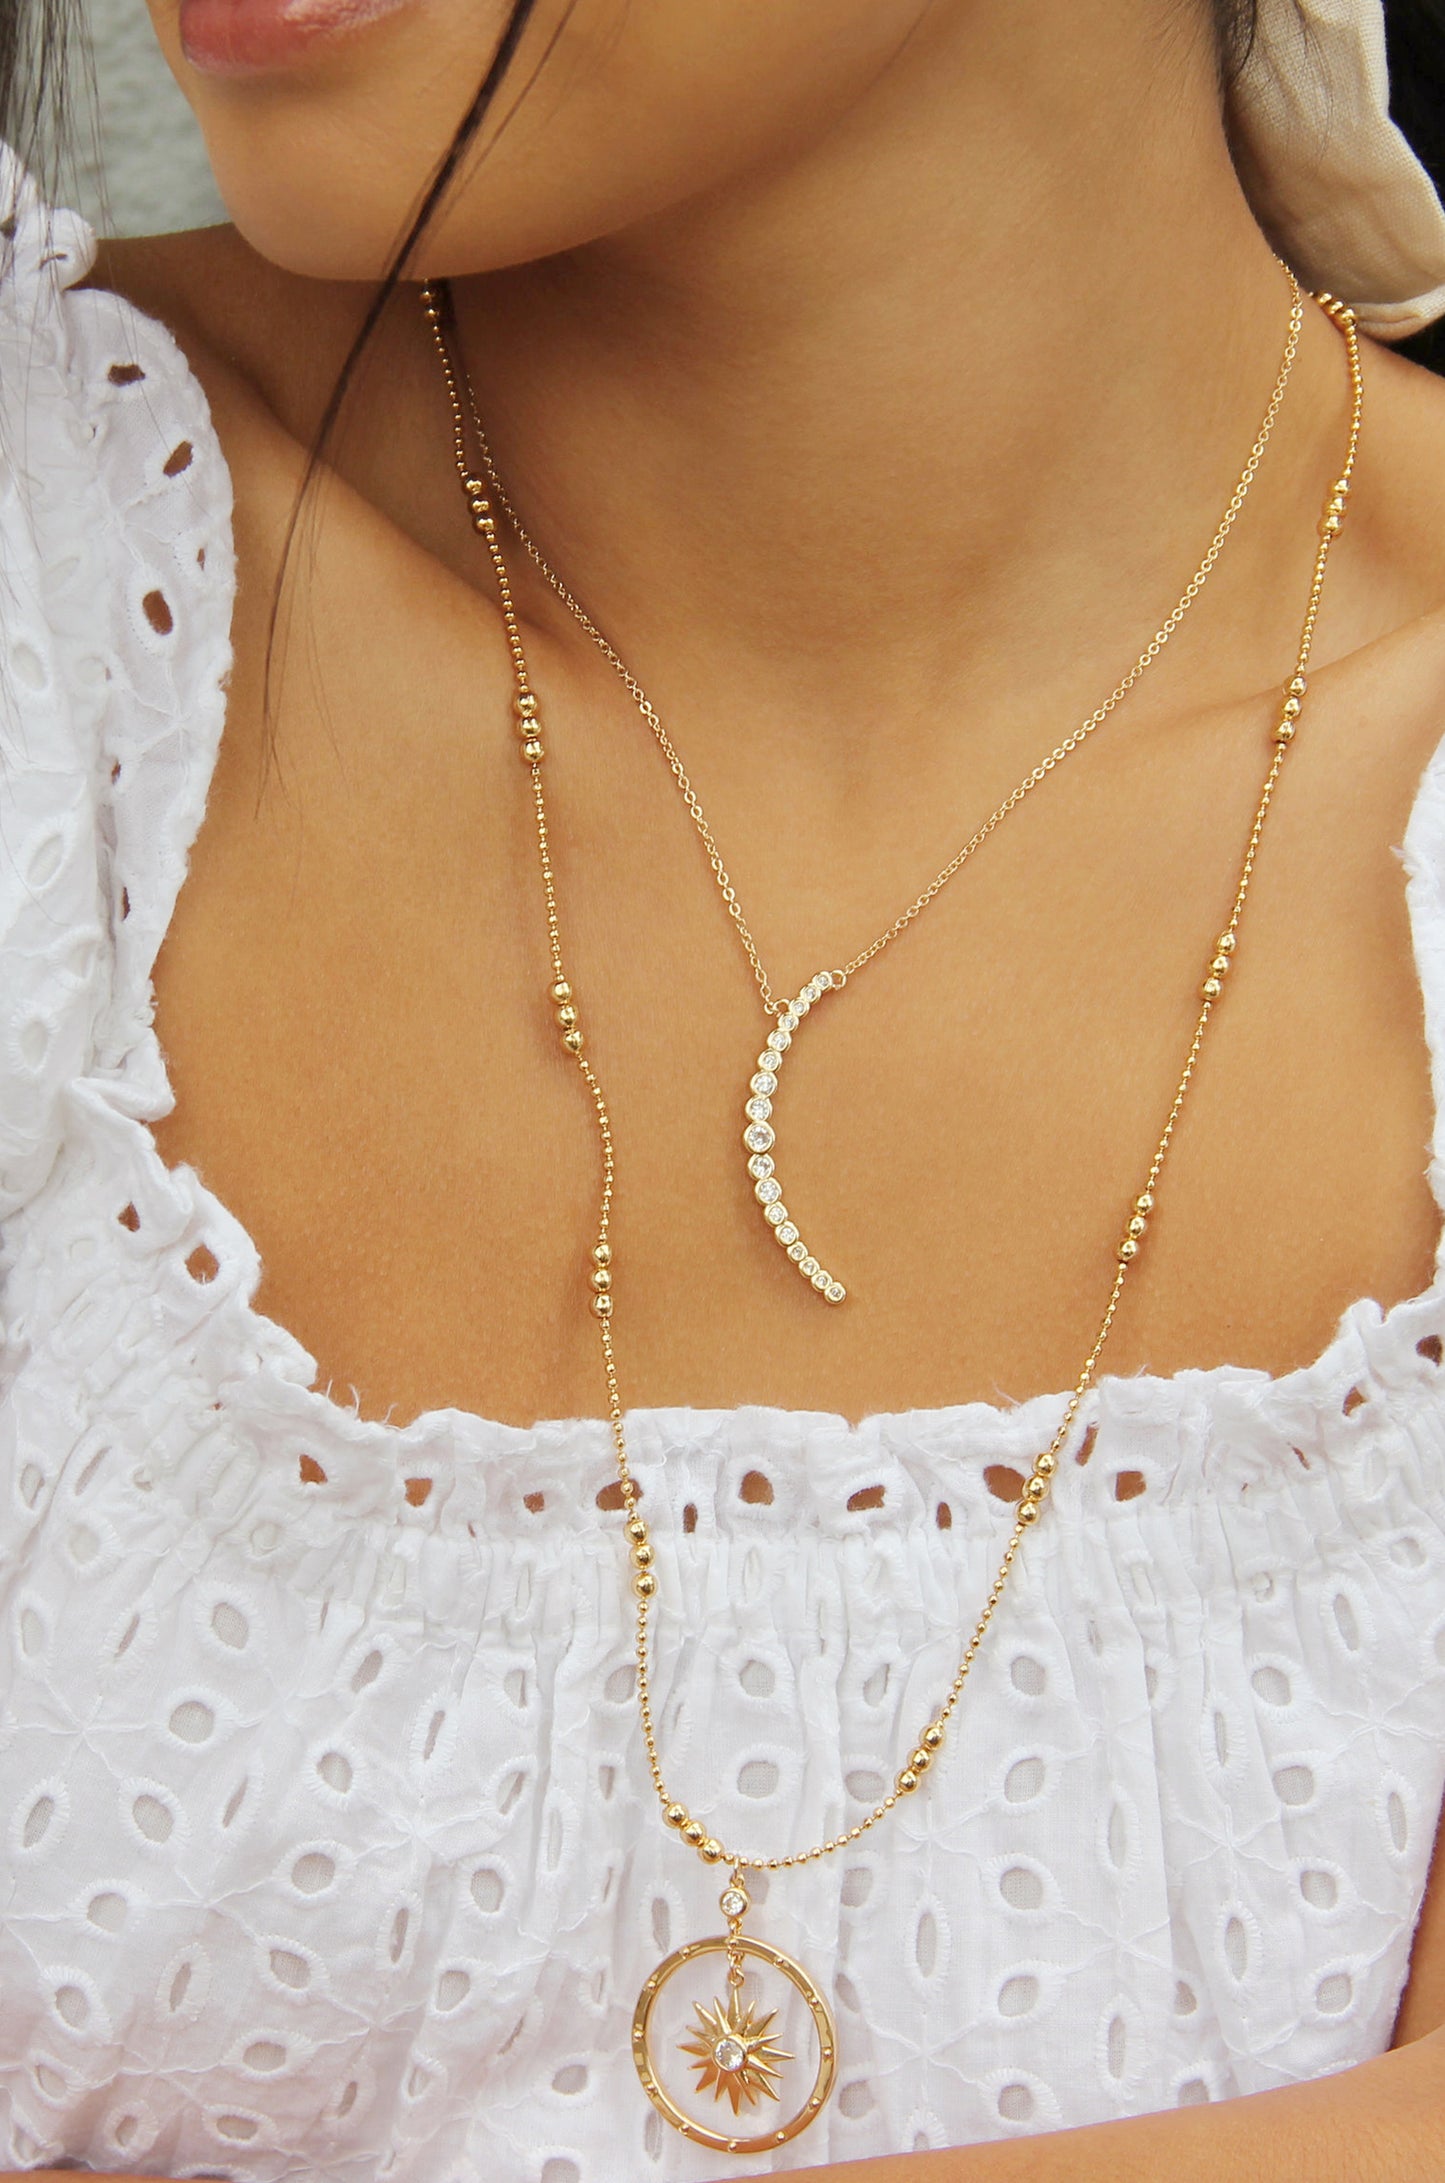 Waning Crystal Crescent Moon 18k Gold Plated Necklace shown on a model  